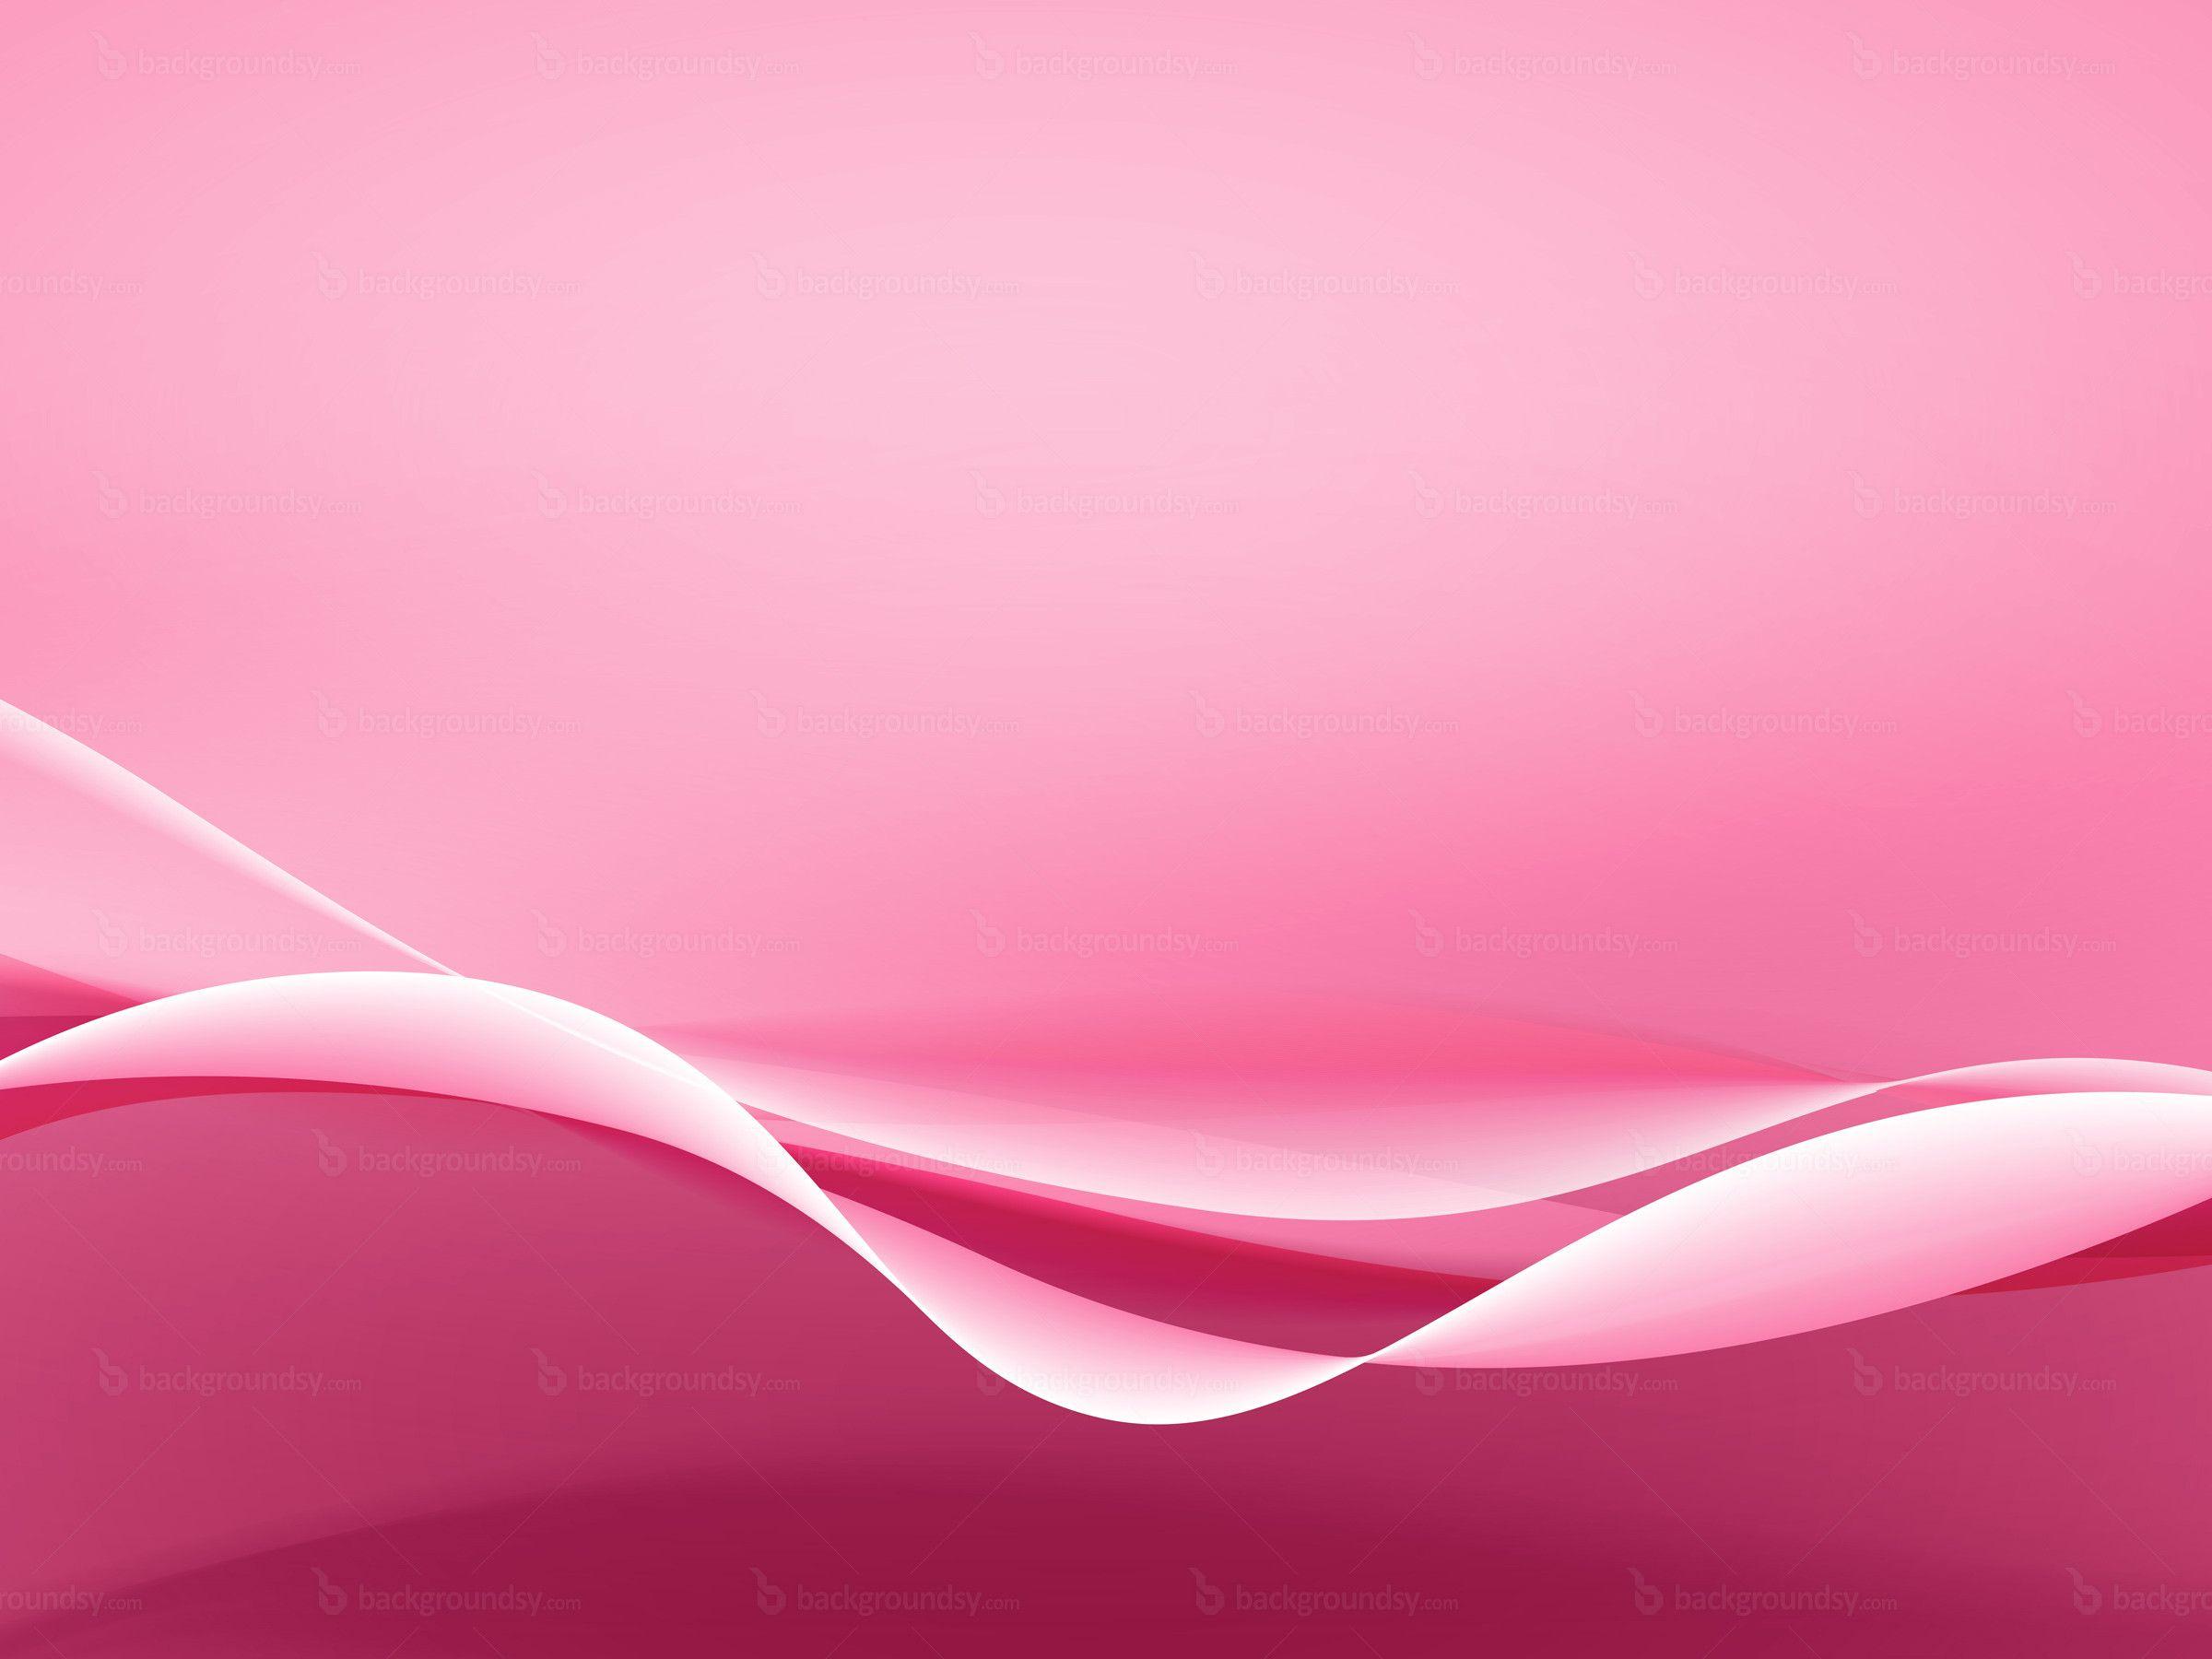 Pink Image For Background